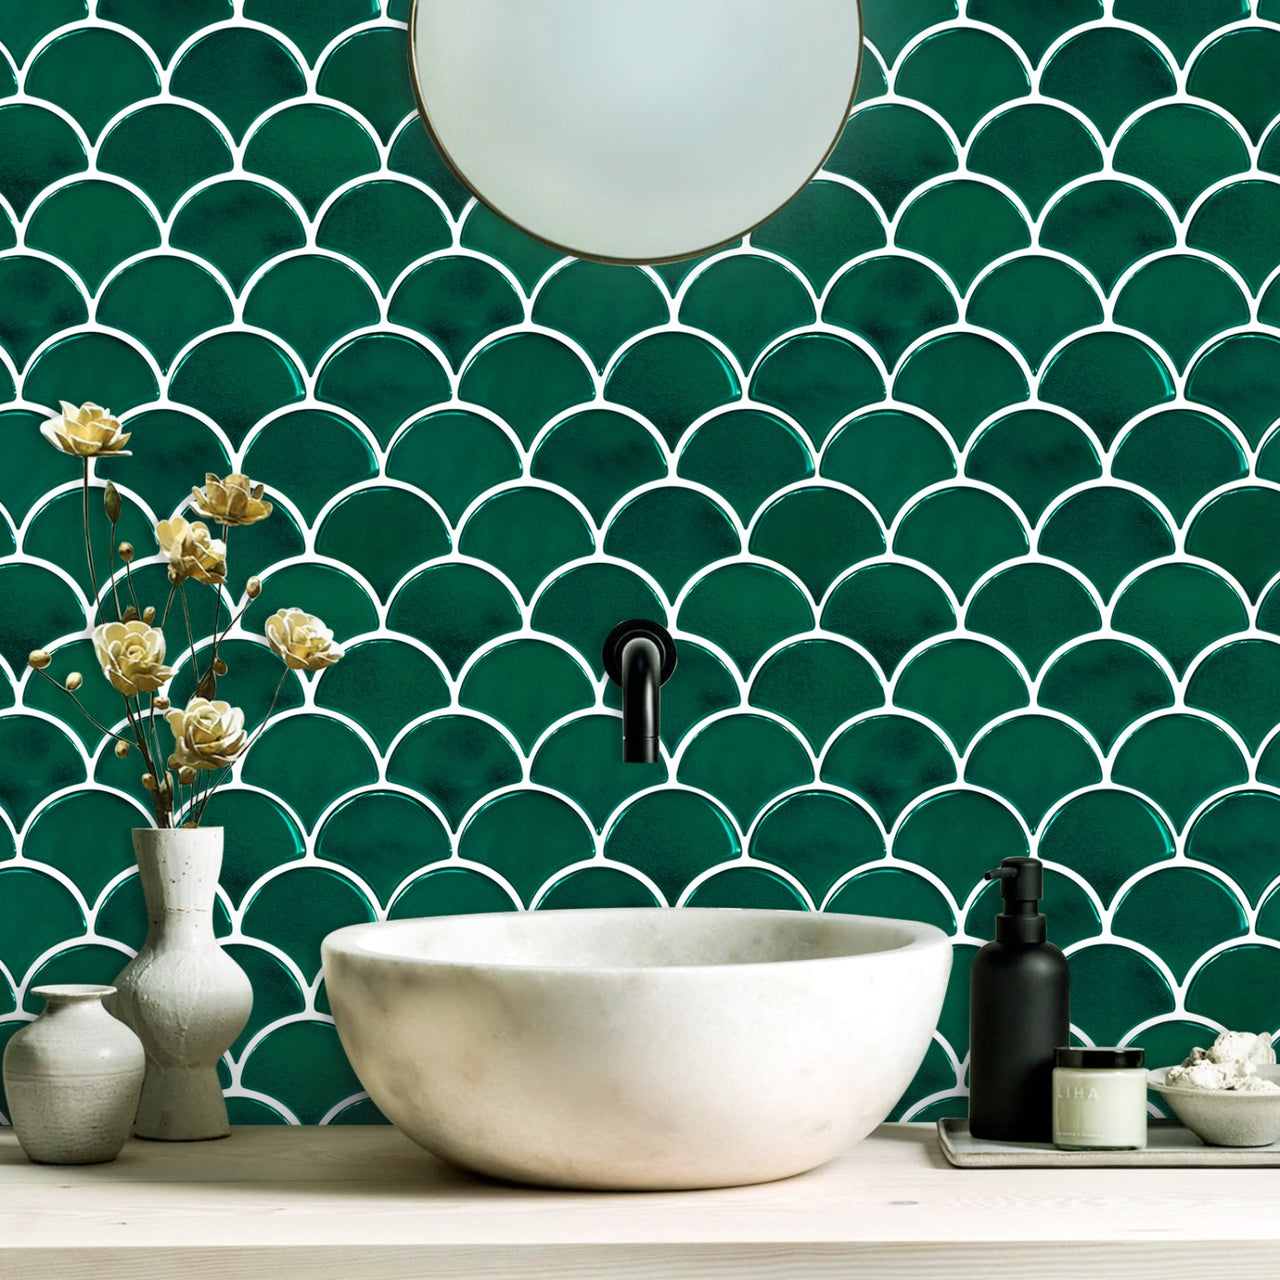 Green scalloped peel and stick tiles with white grout in bathroom